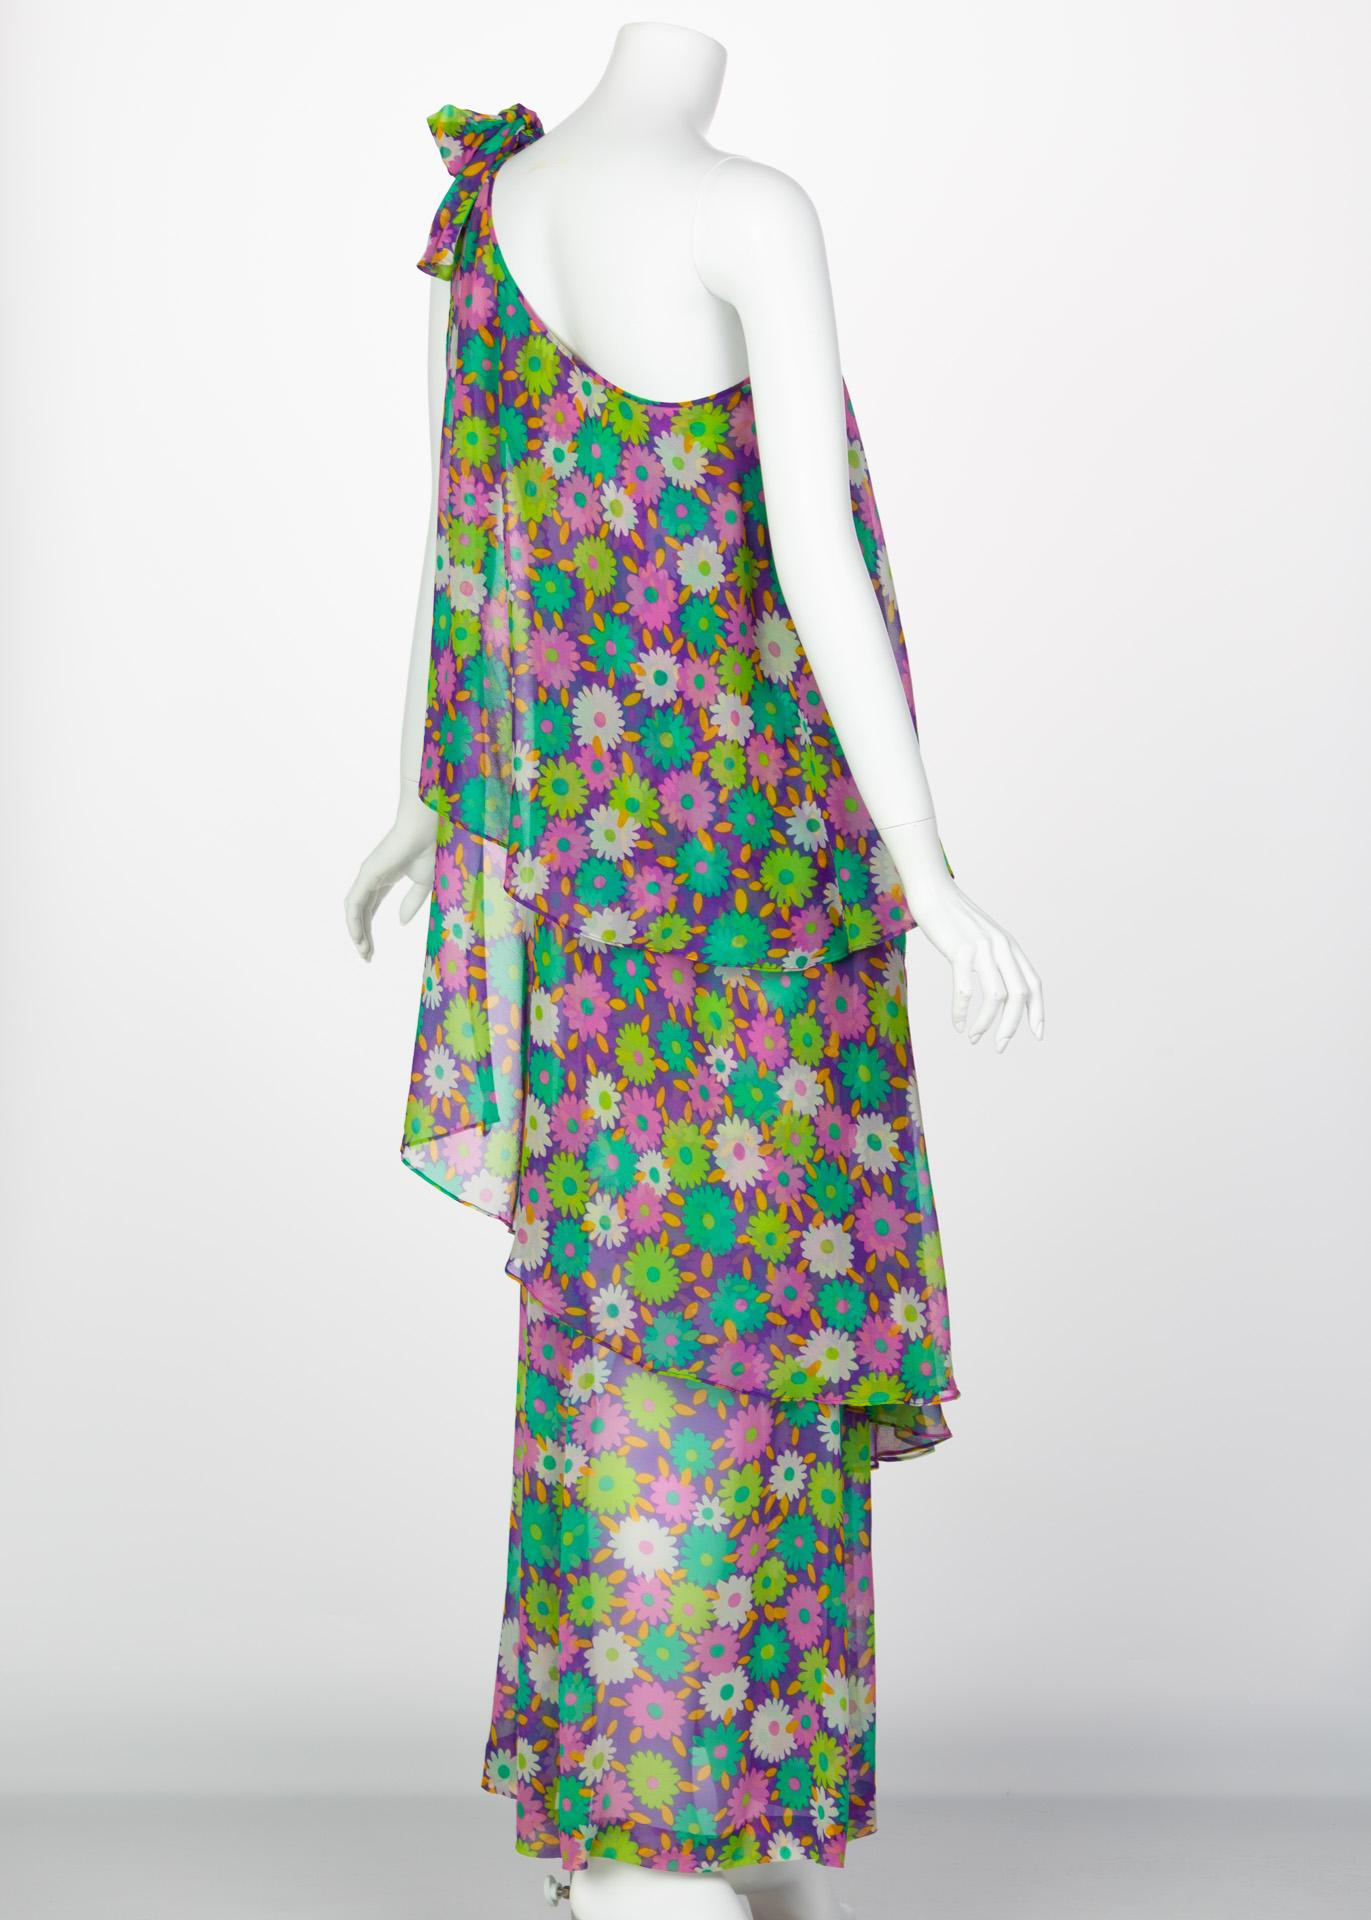 Yves Saint Laurent Multi-Color Floral One Shoulder Layered Silk Dress YSL, 1970s In Good Condition In Boca Raton, FL